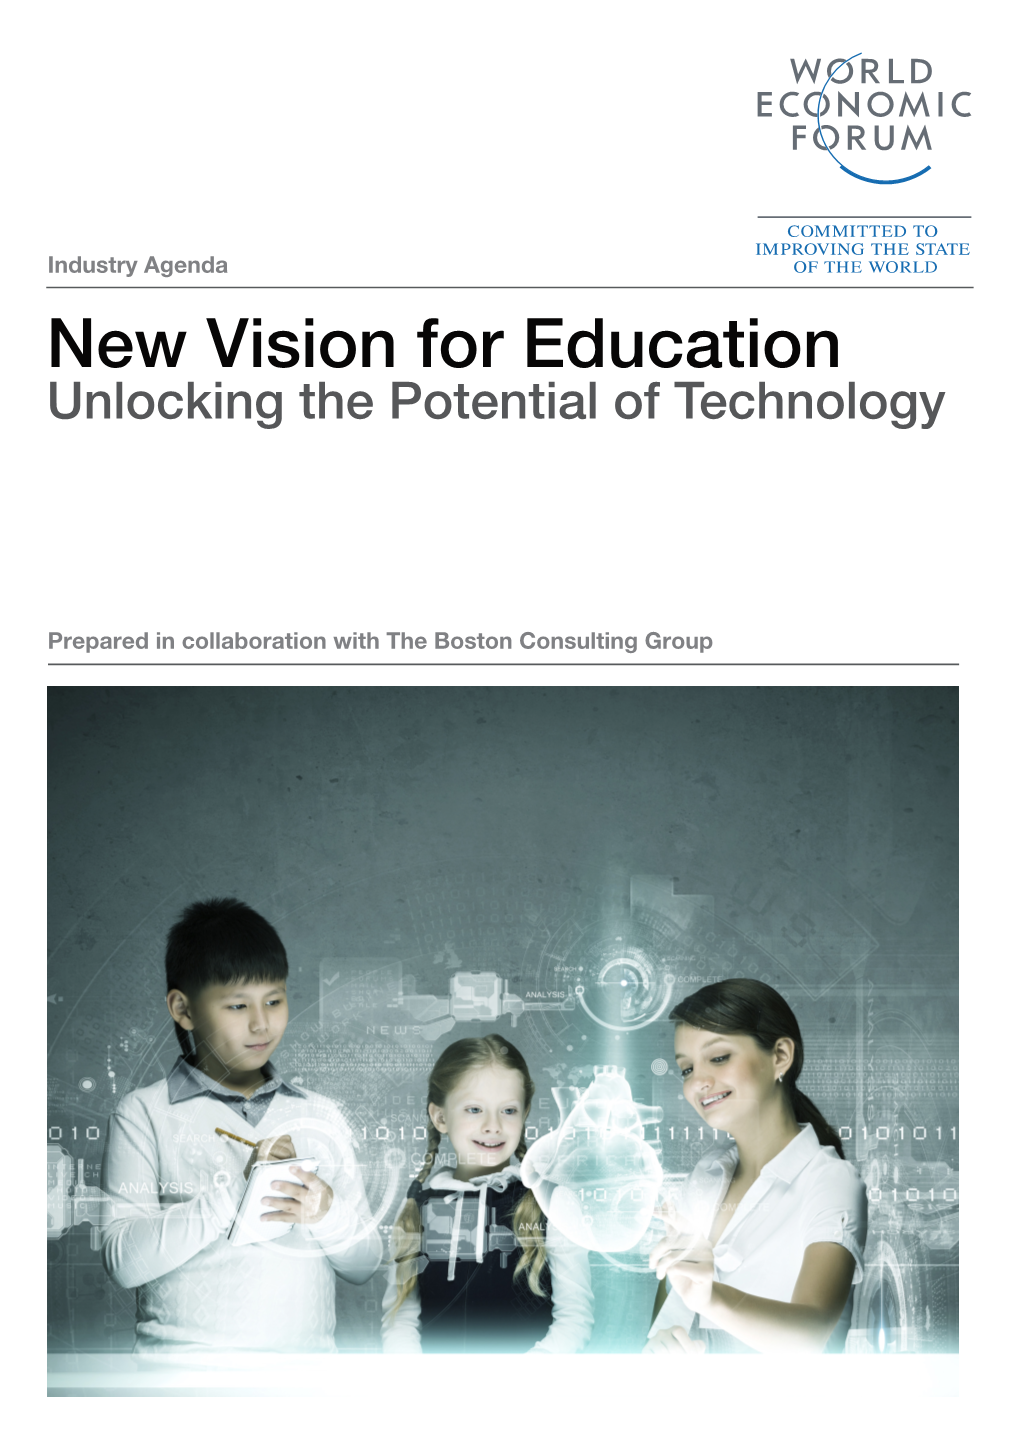 New Vision for Education: Unlocking the Potential of Technology